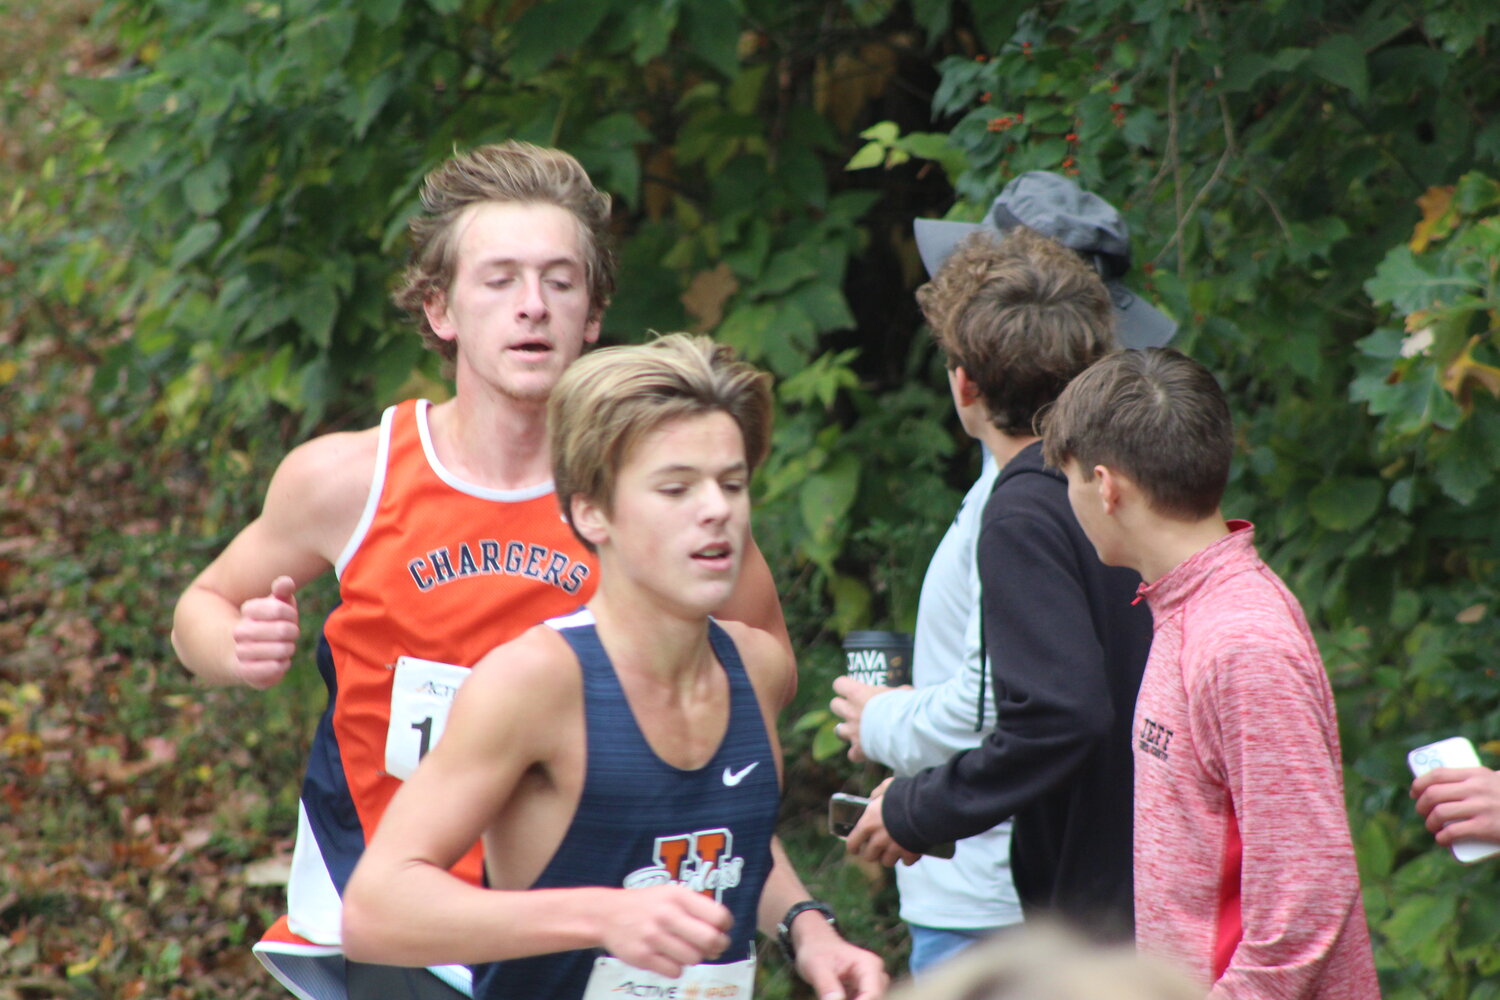 Charger senior Paul Lueking extended his career one week and will race at next week's Regional.